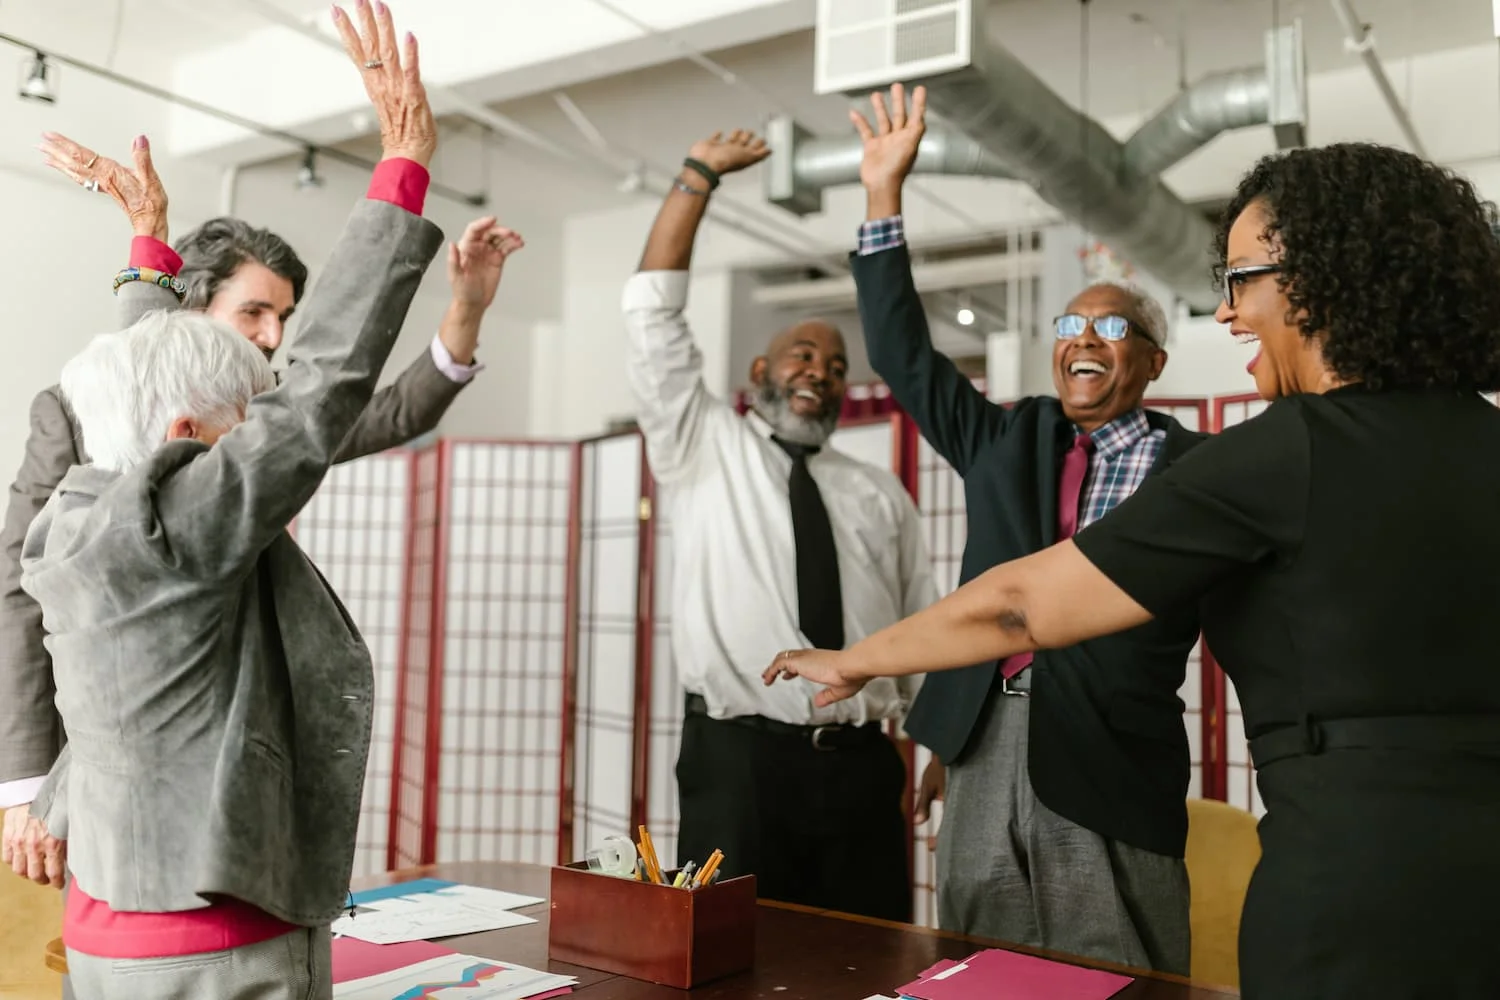  Fostering Fun in the Workplace: A Key to Unlocking Employee Well-Being